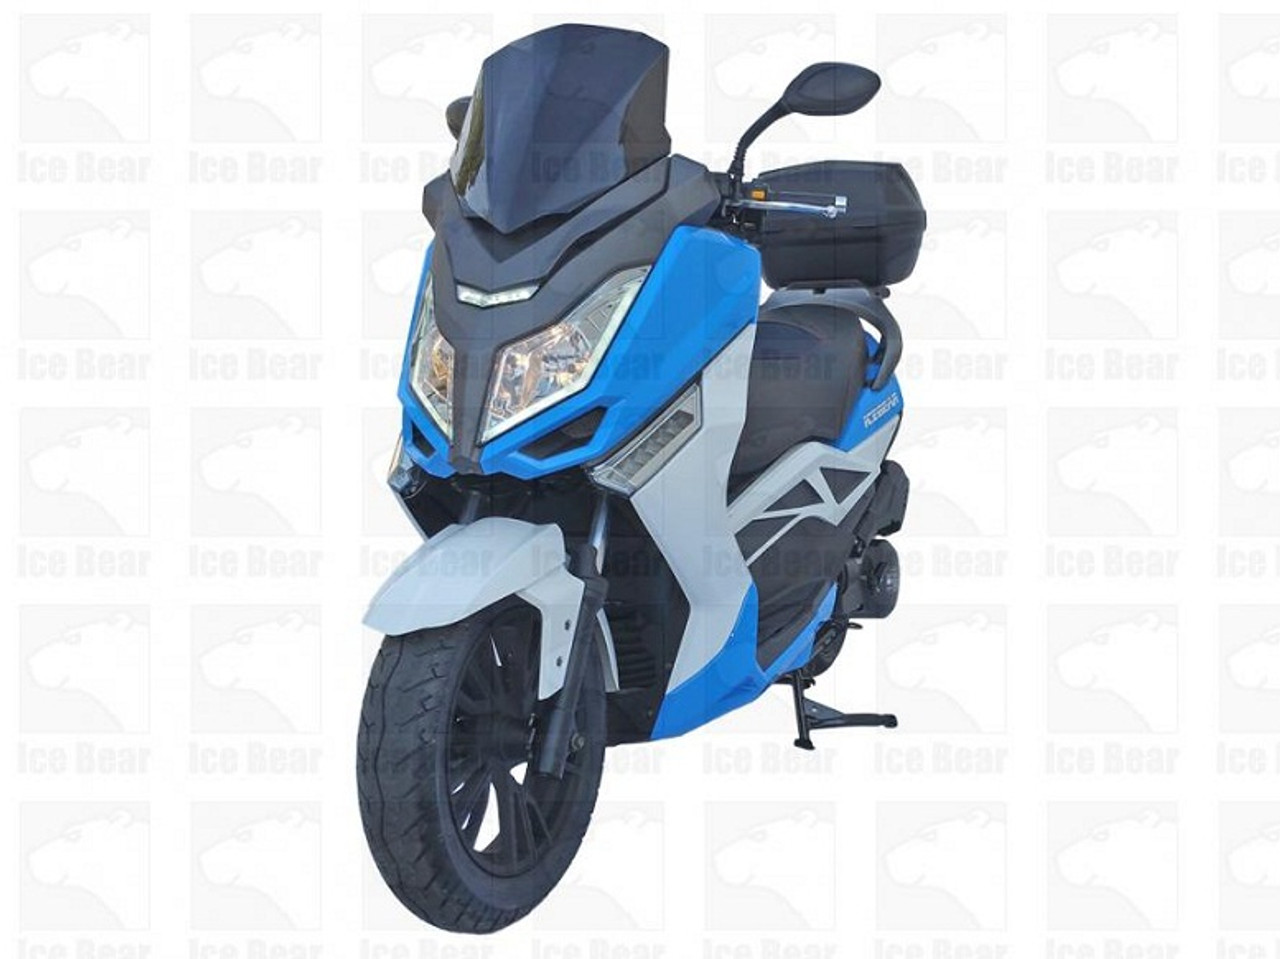 New 4 Stroke Air Cooled Scooter T9 150cc (PMZ150-T9)